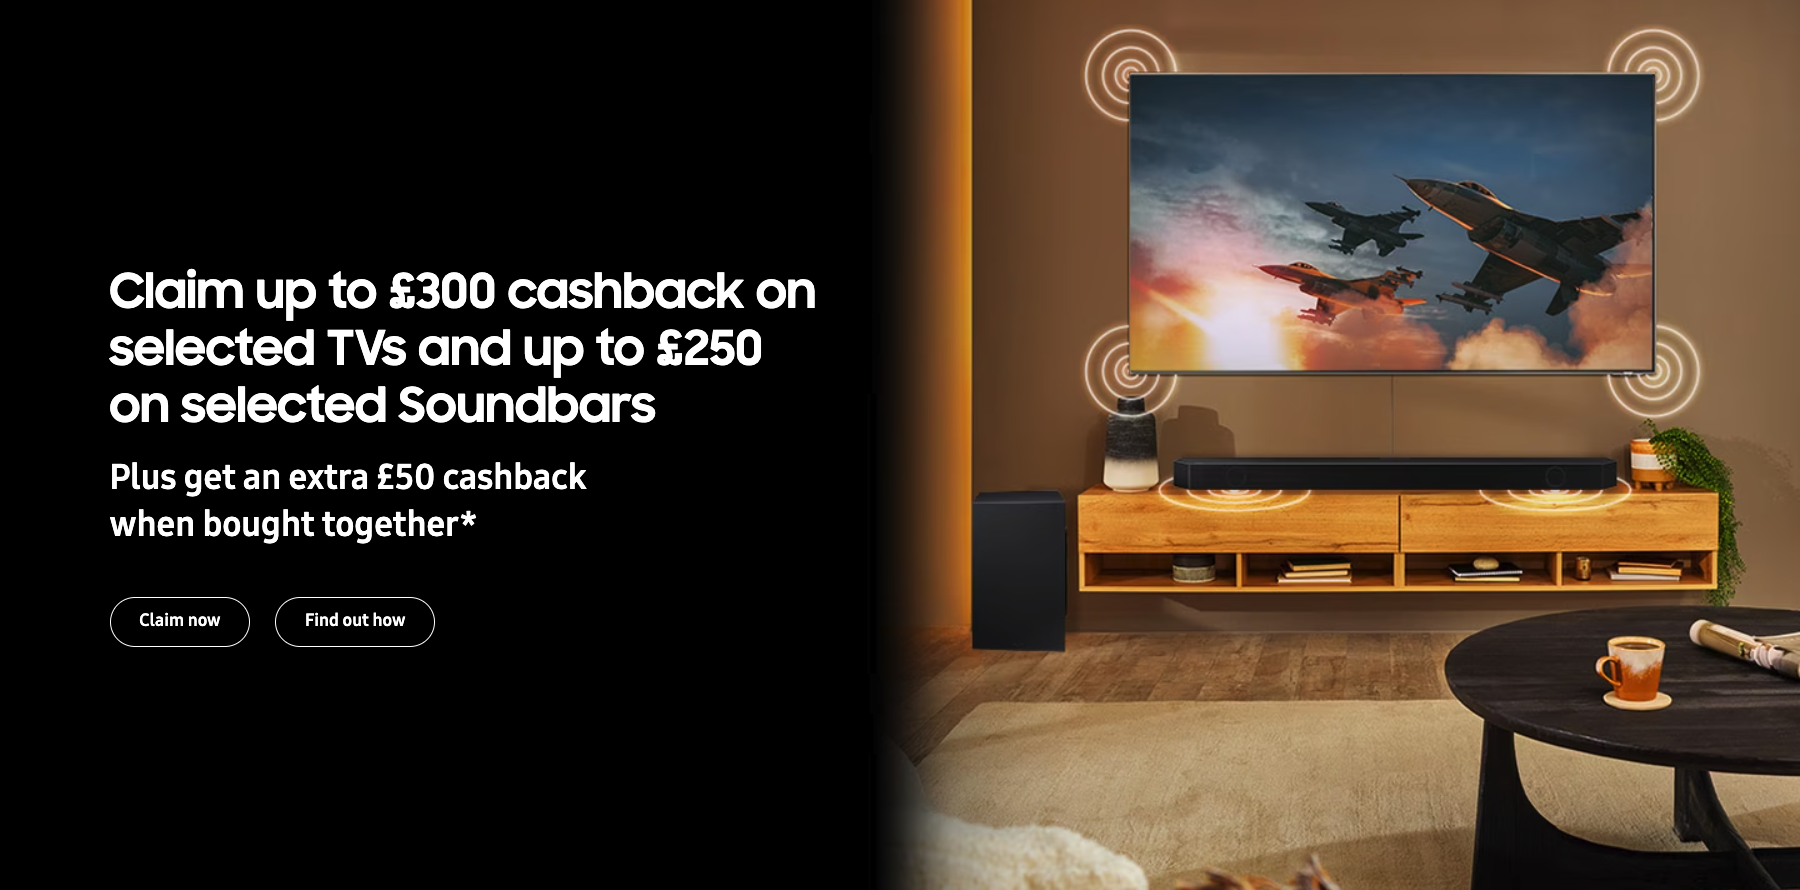 Up To £300 Cashback On Select Samsung TVs And Soundbars In The UK